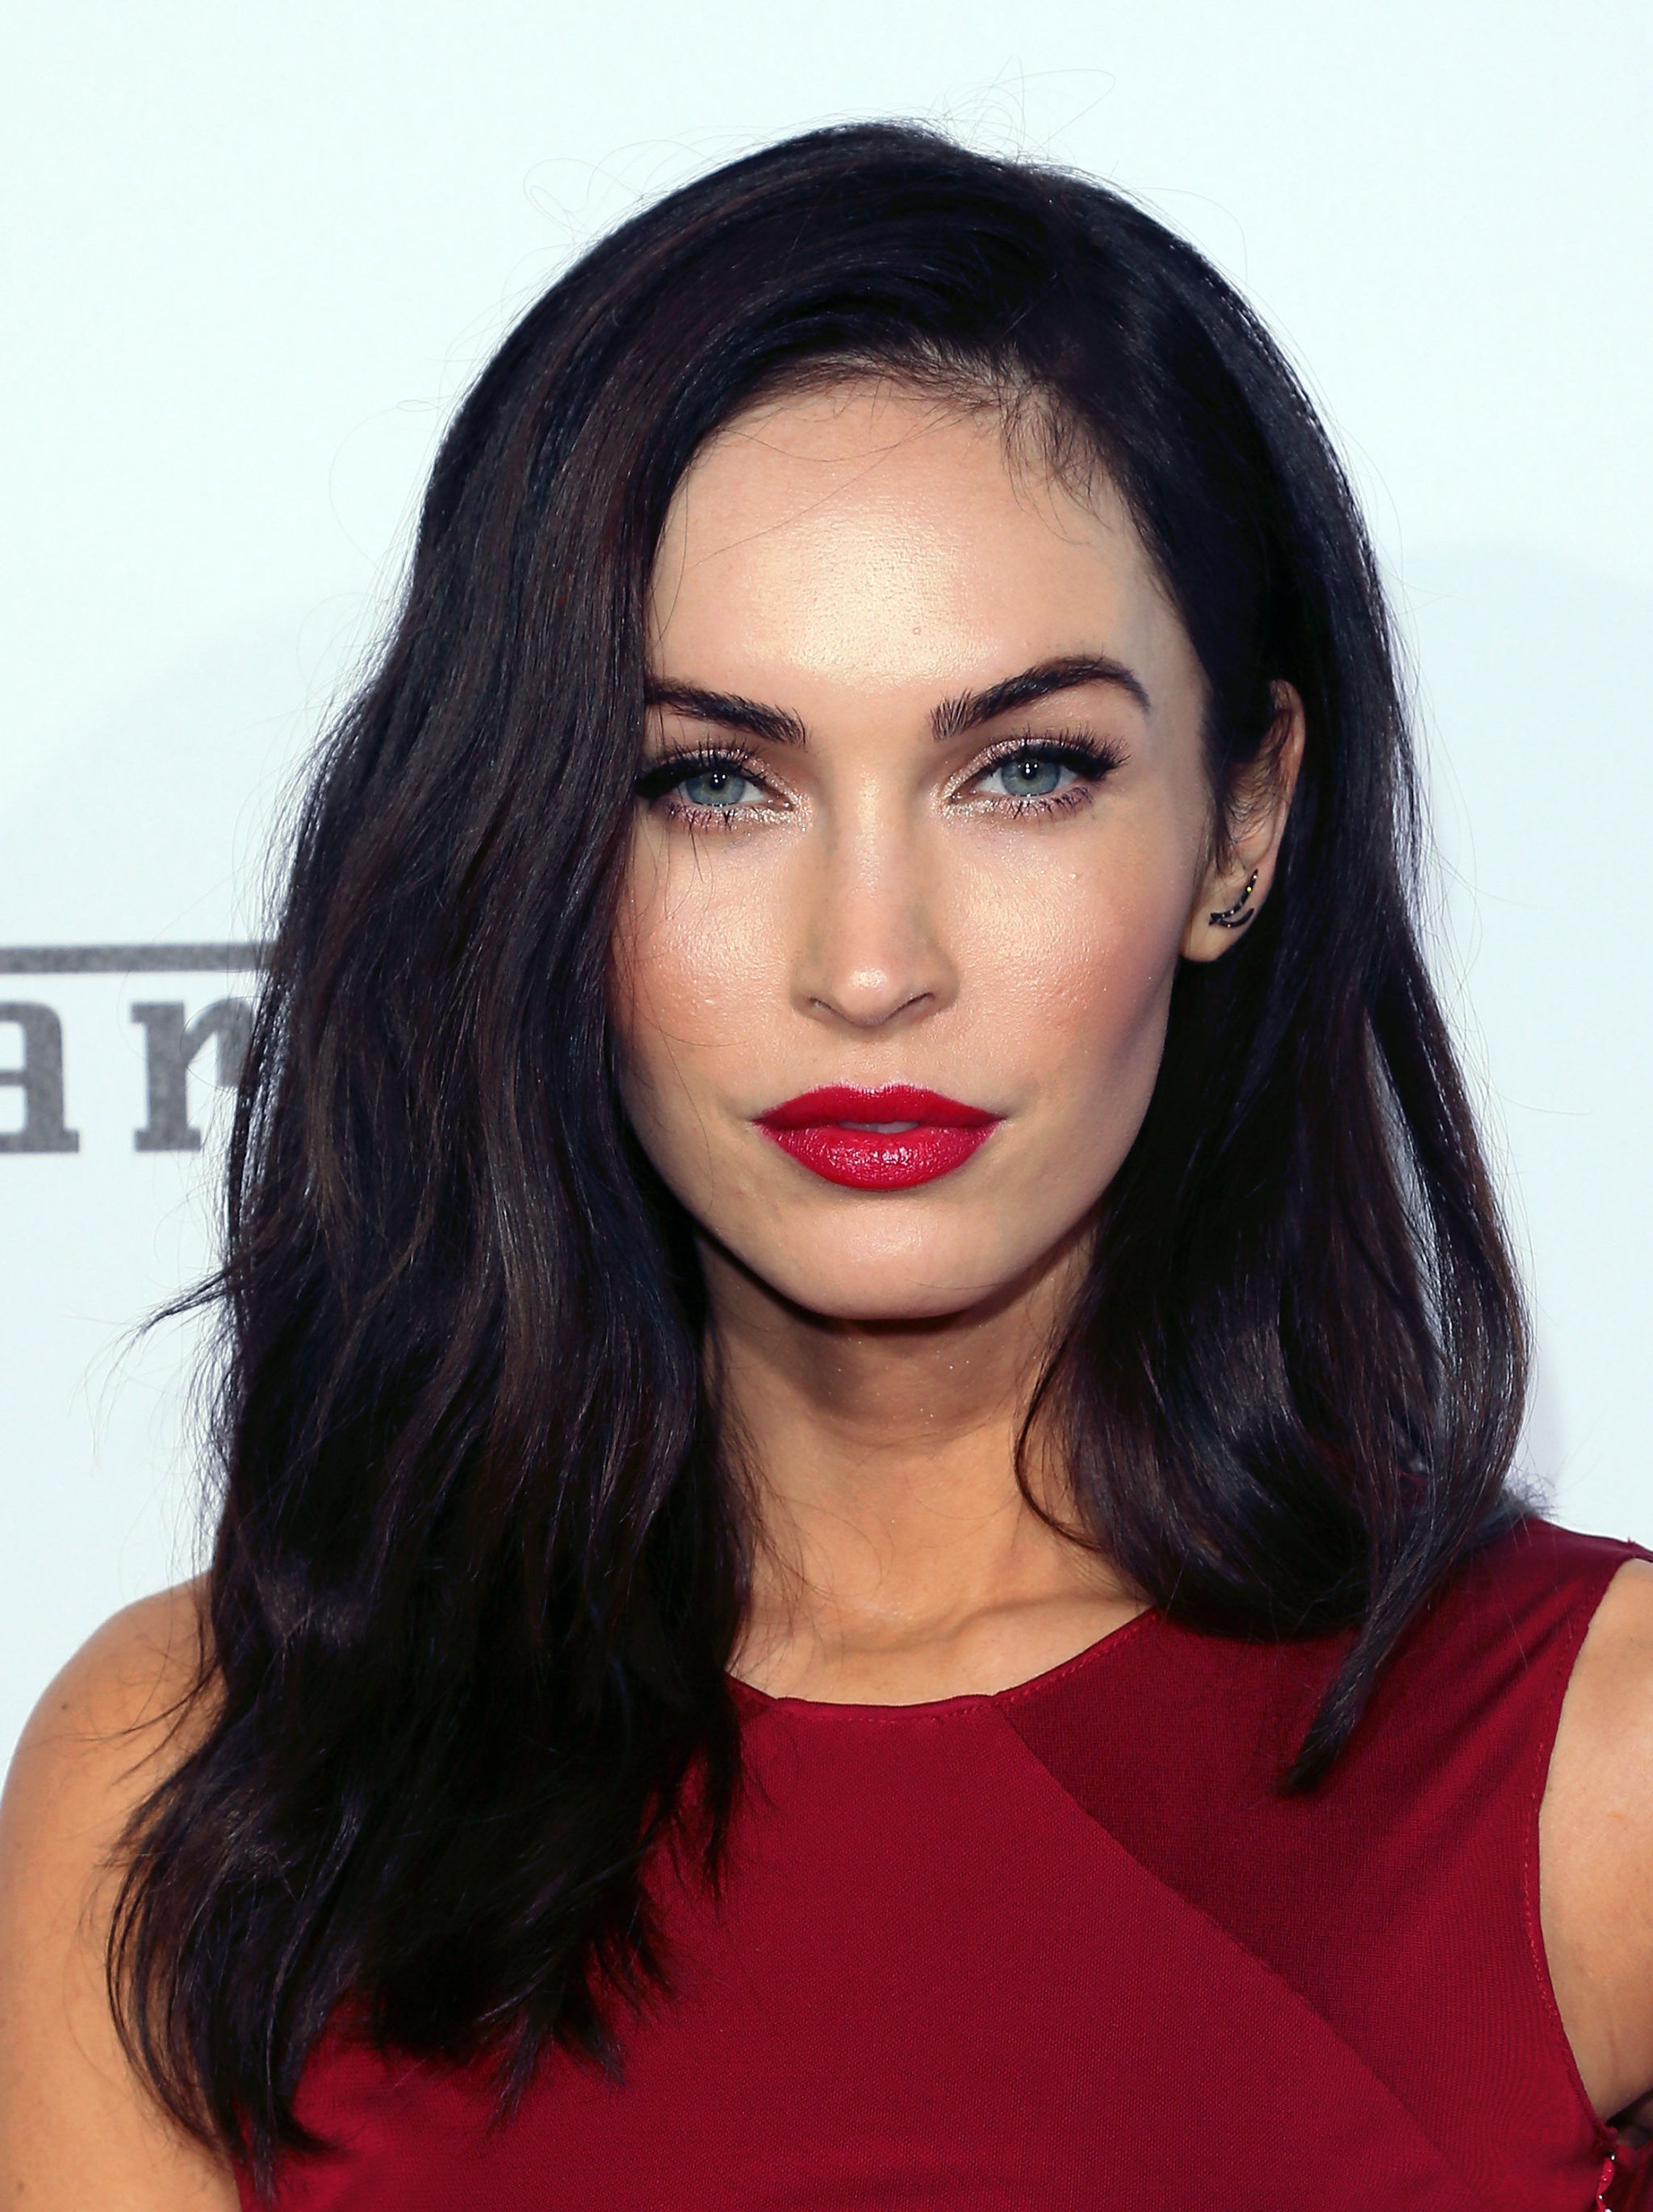 chelsie hull recommends Is Megan Fox A Porn Star